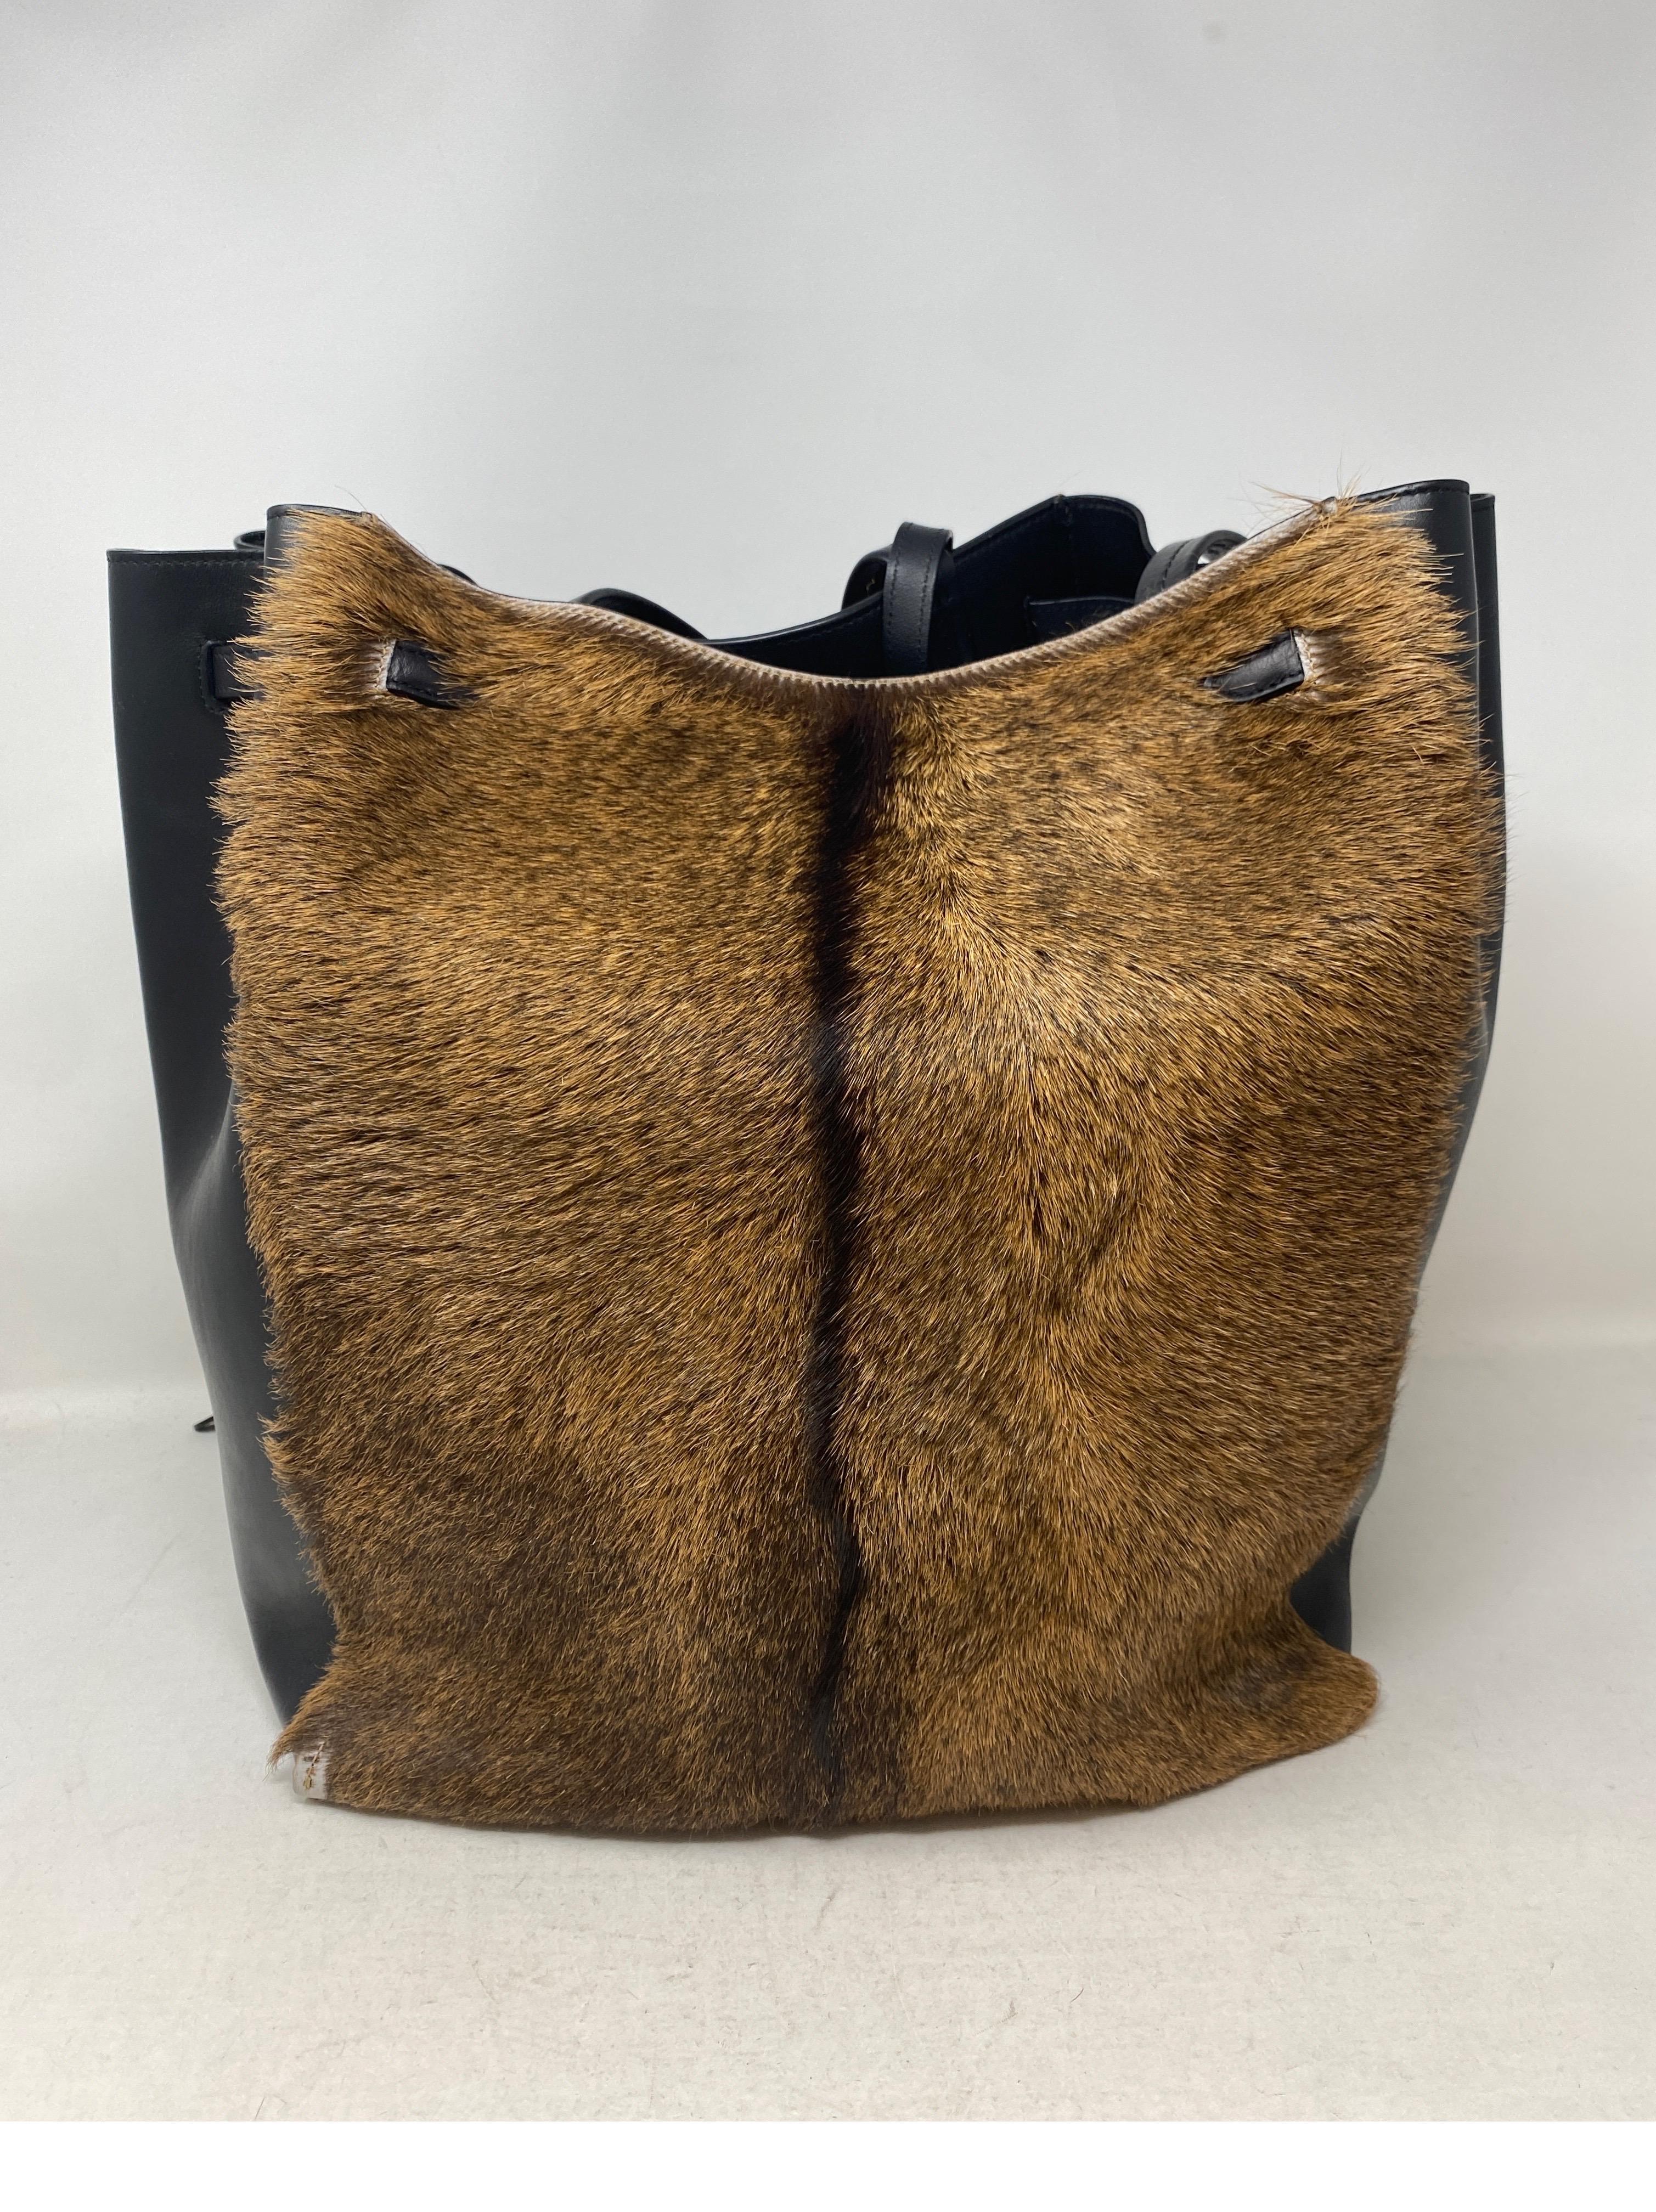 Celine Pony Hair Fur Bag. Black leather and pony hair combination. Cinched bag on top or can be worn open as a tote. Has corner wear. Please look at photos. Interior clean. Overall good condition accept for one corner. Comes with original tags and